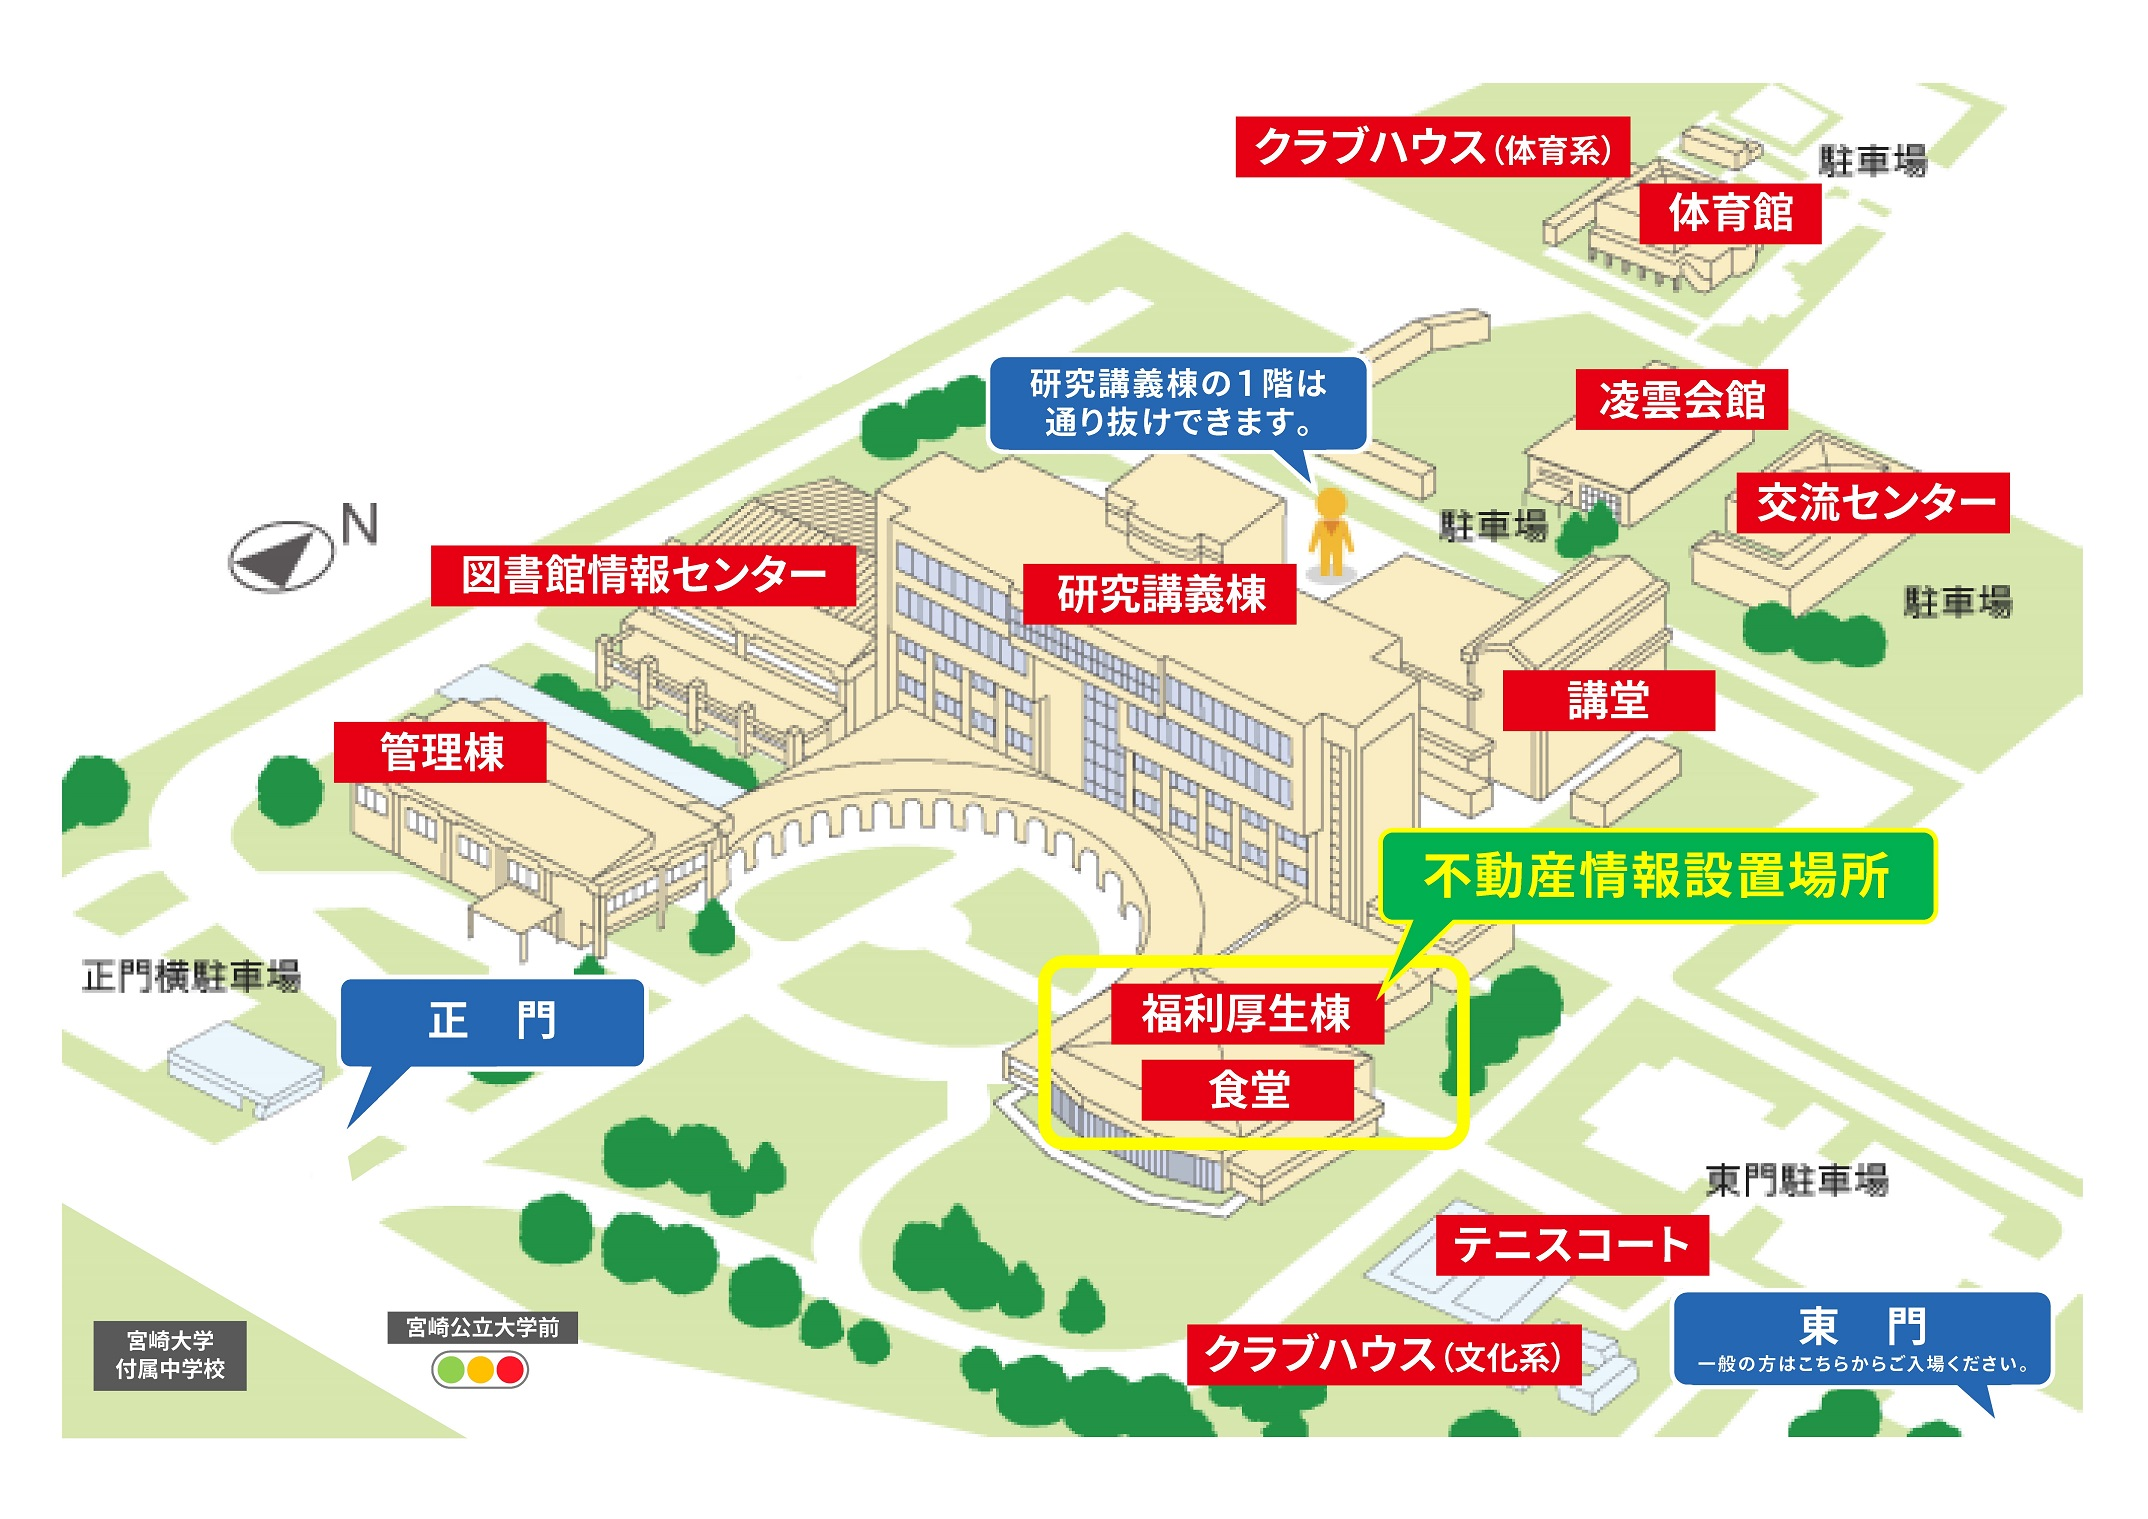 campusinfo_map.png